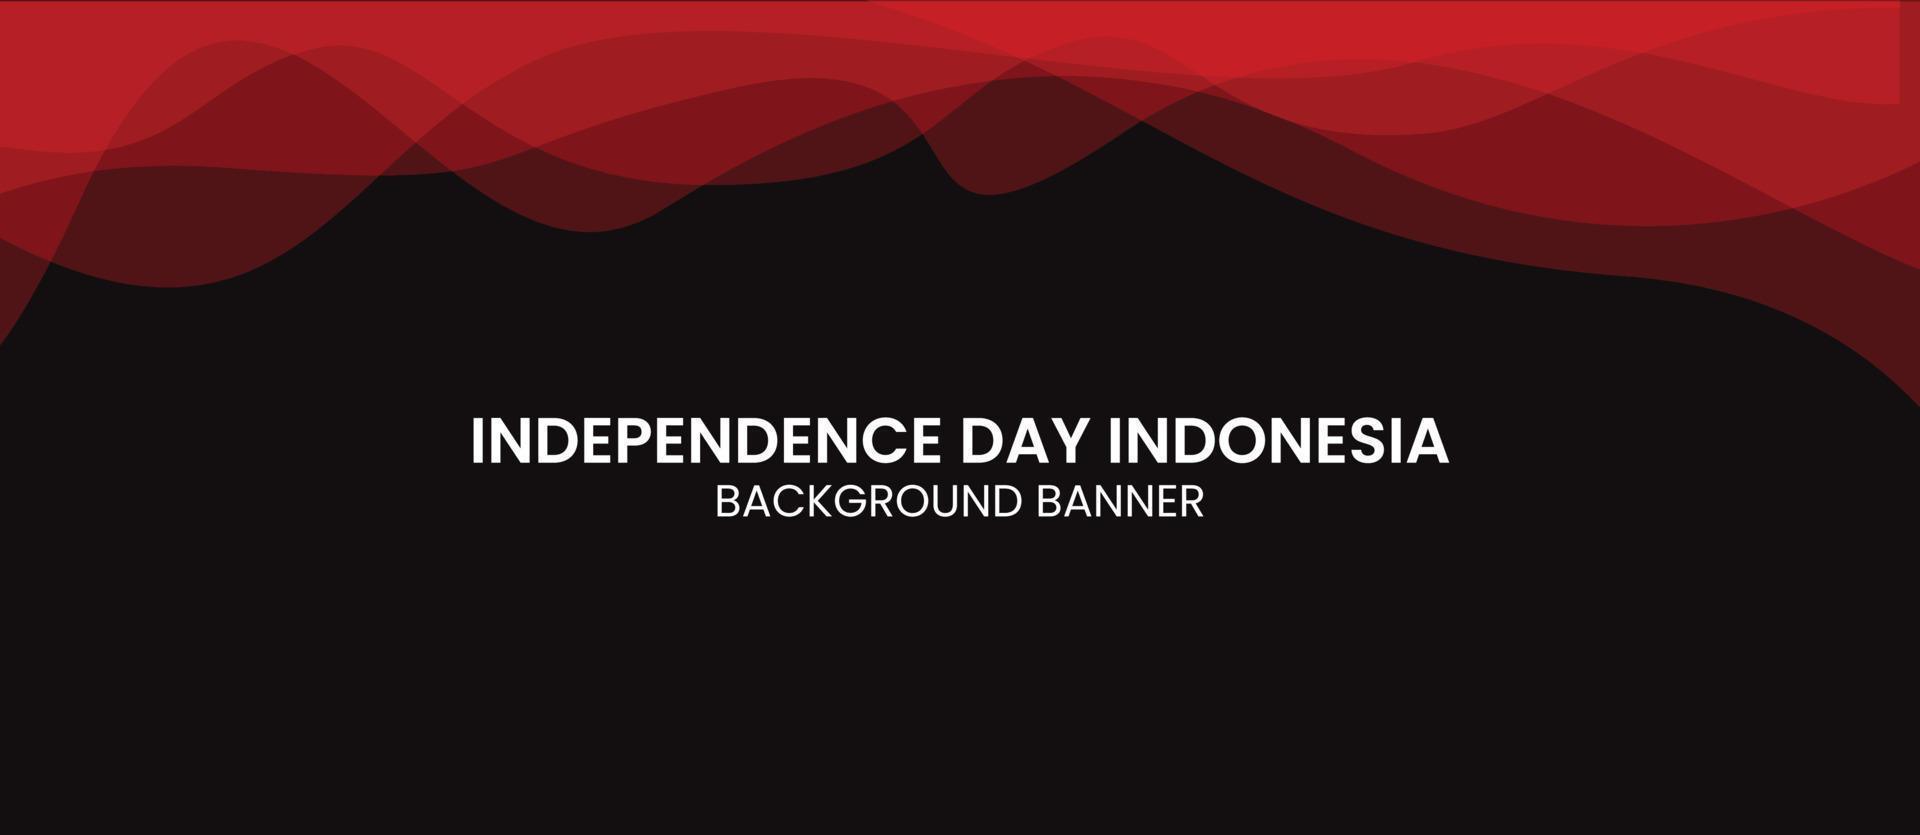 Indonesia's 77th independence day celebration background banner suitable for website and social media platform vector